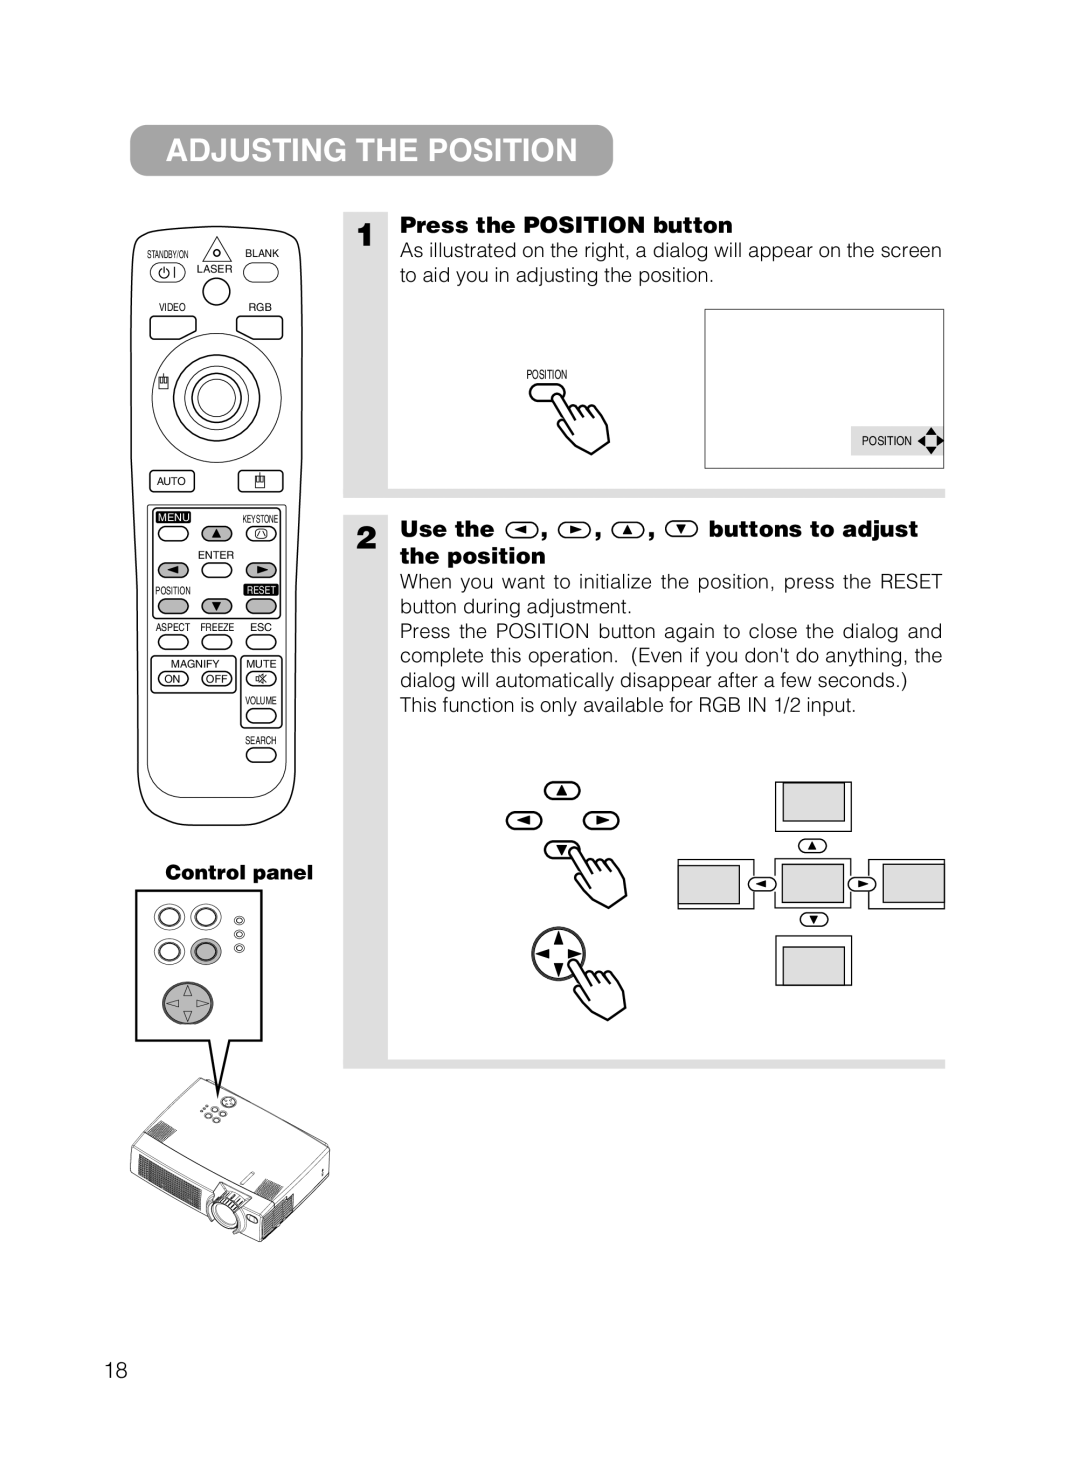 Grundig CP-X385W user manual Adjusting the Position, Press the Position button, Use Buttons to adjust Position 